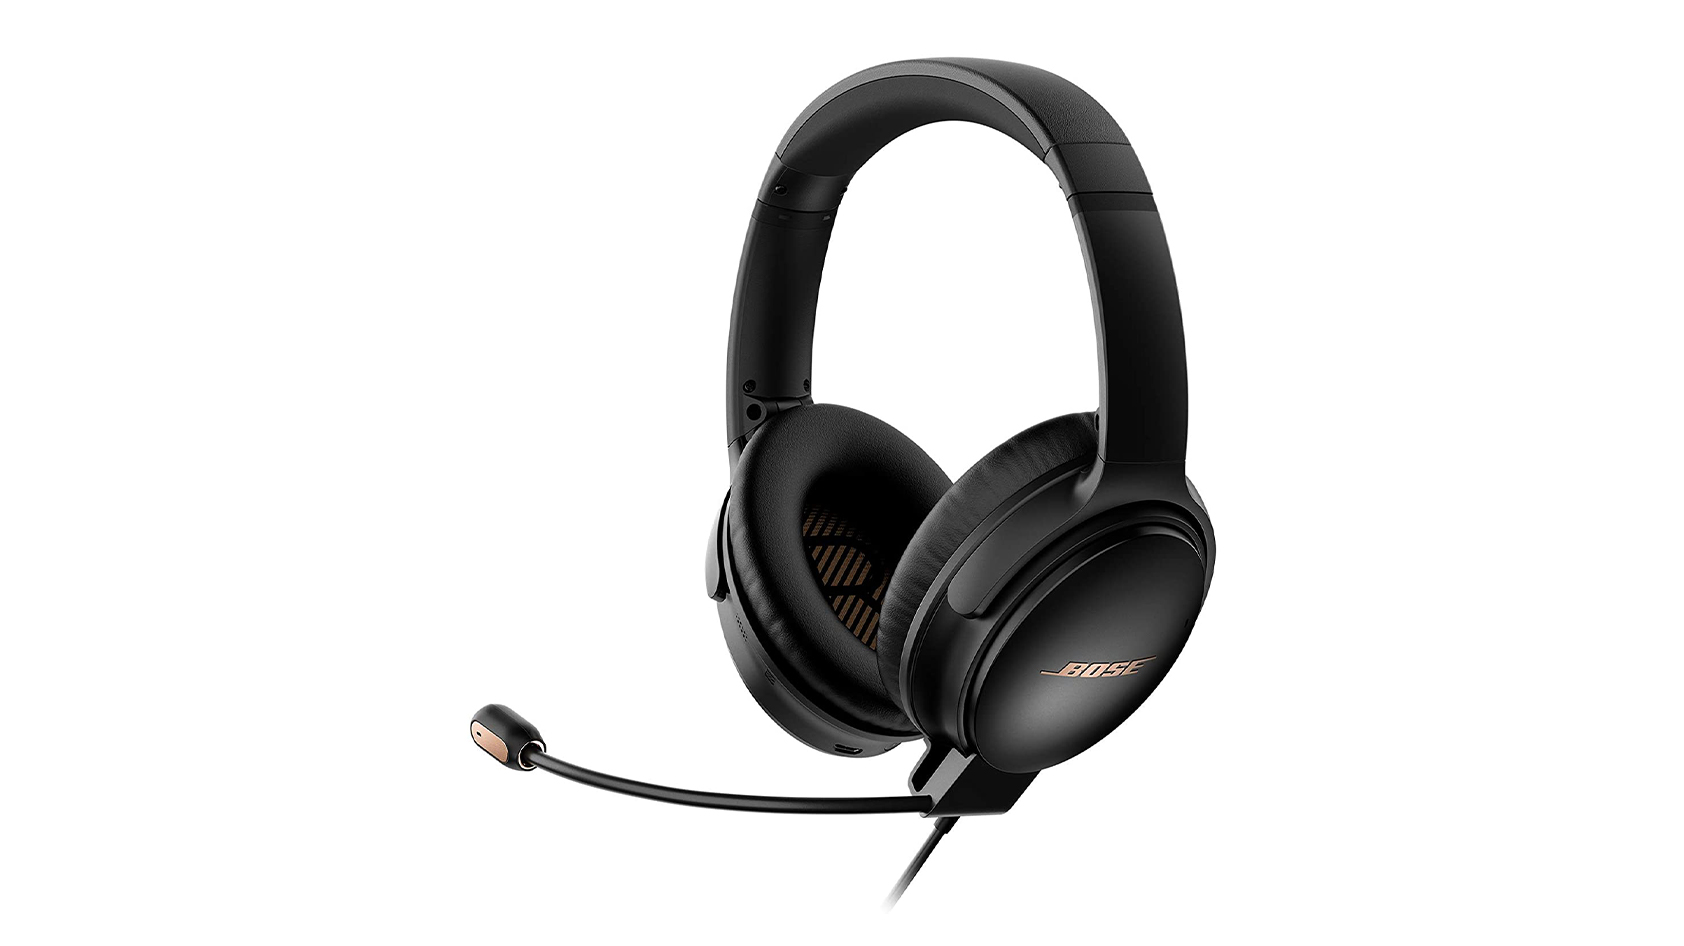 The Bose QuietComfort 35 II Gaming Headset​ in black against a white background.